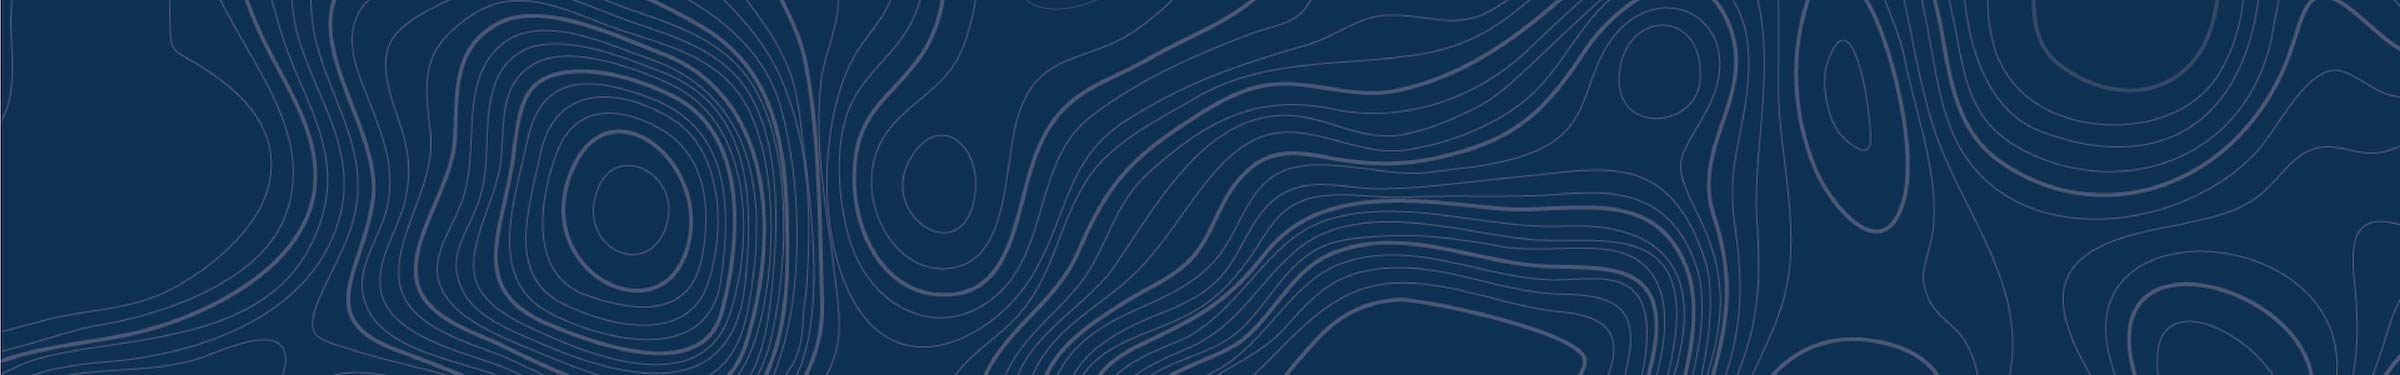 A dark blue background with wavy lines.